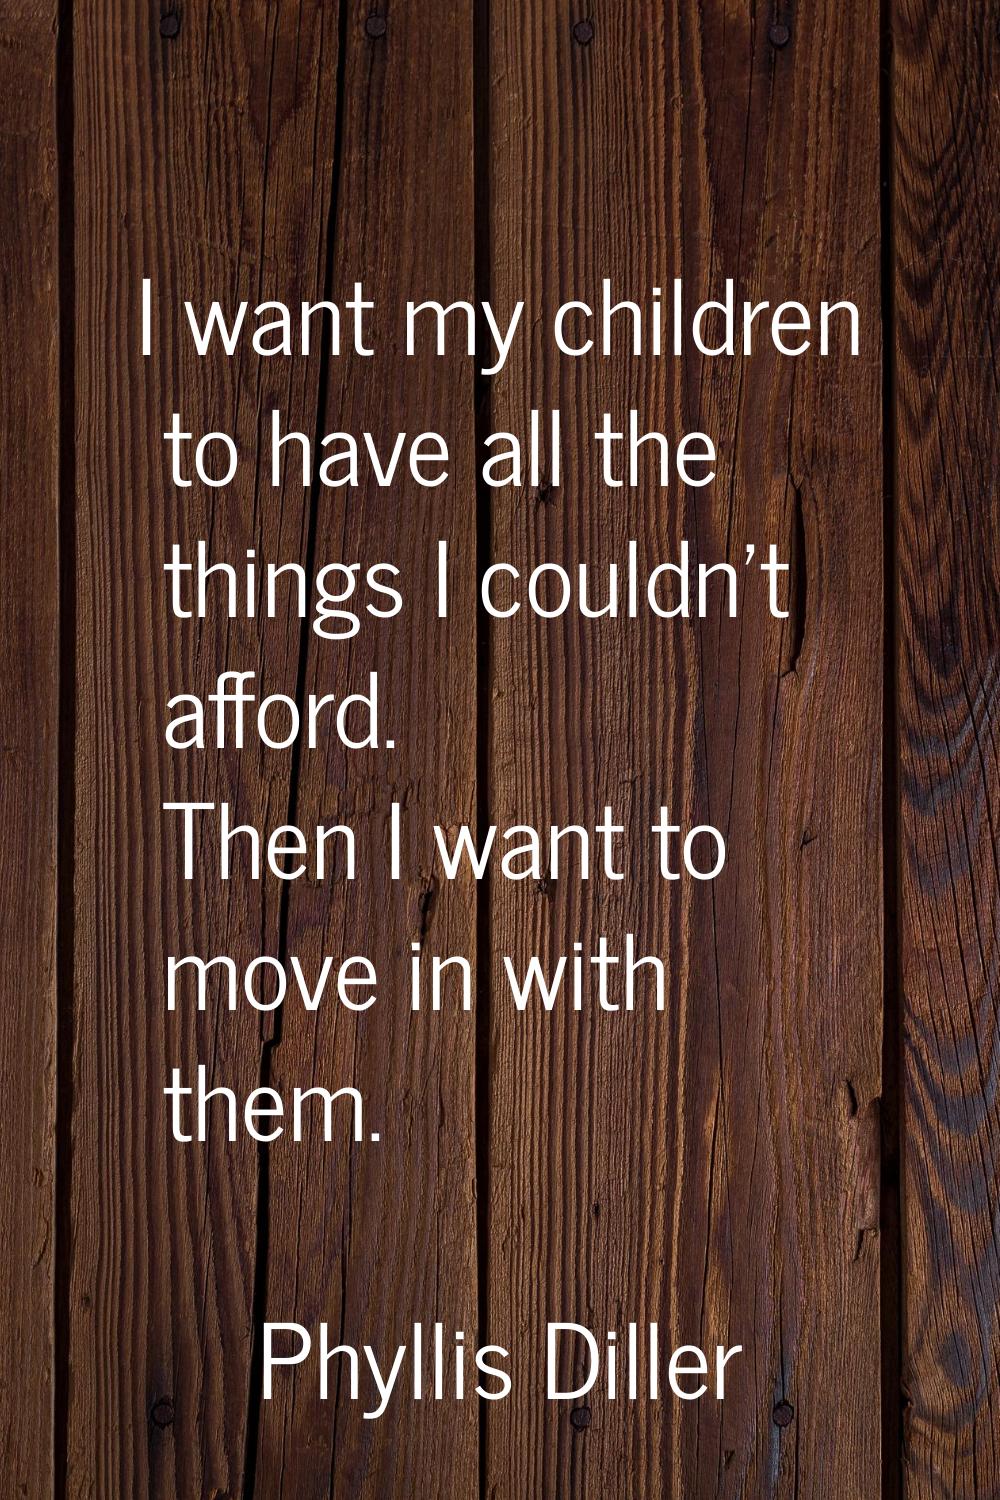 I want my children to have all the things I couldn't afford. Then I want to move in with them.